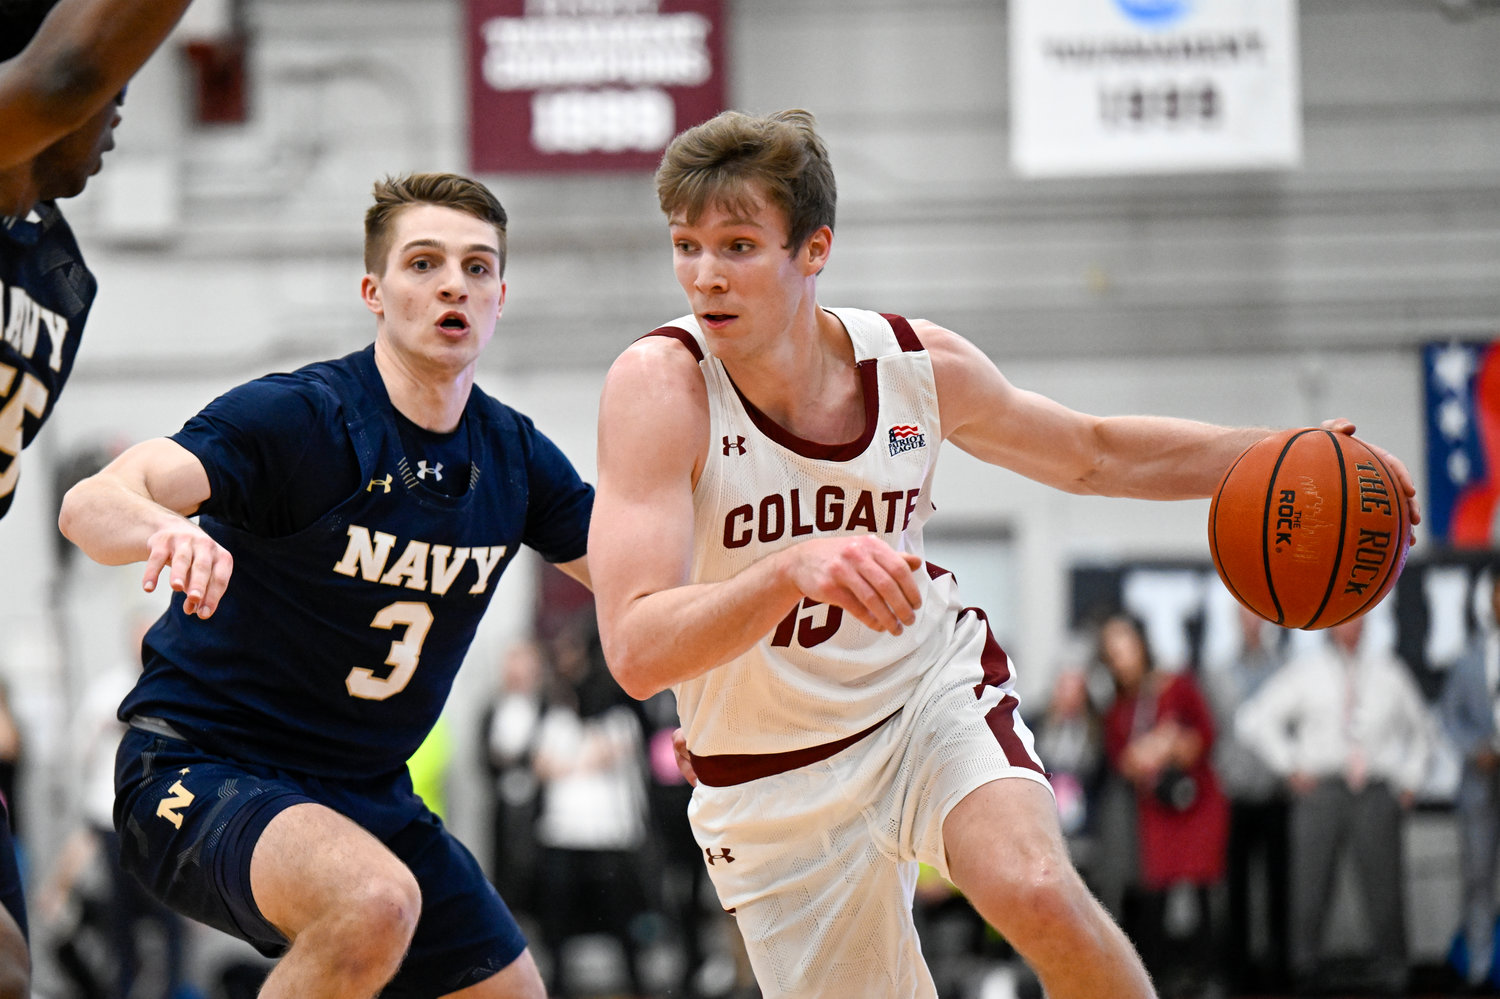 NCAA TOURNEY BOUND — Navy guard Sean Yoder (3) defends against Colgate guard Tucker Richardson (15) during the first half of the Patriot League men’s tournament championship on Wednesday night in Hamilton. The Raiders won, 74-58.